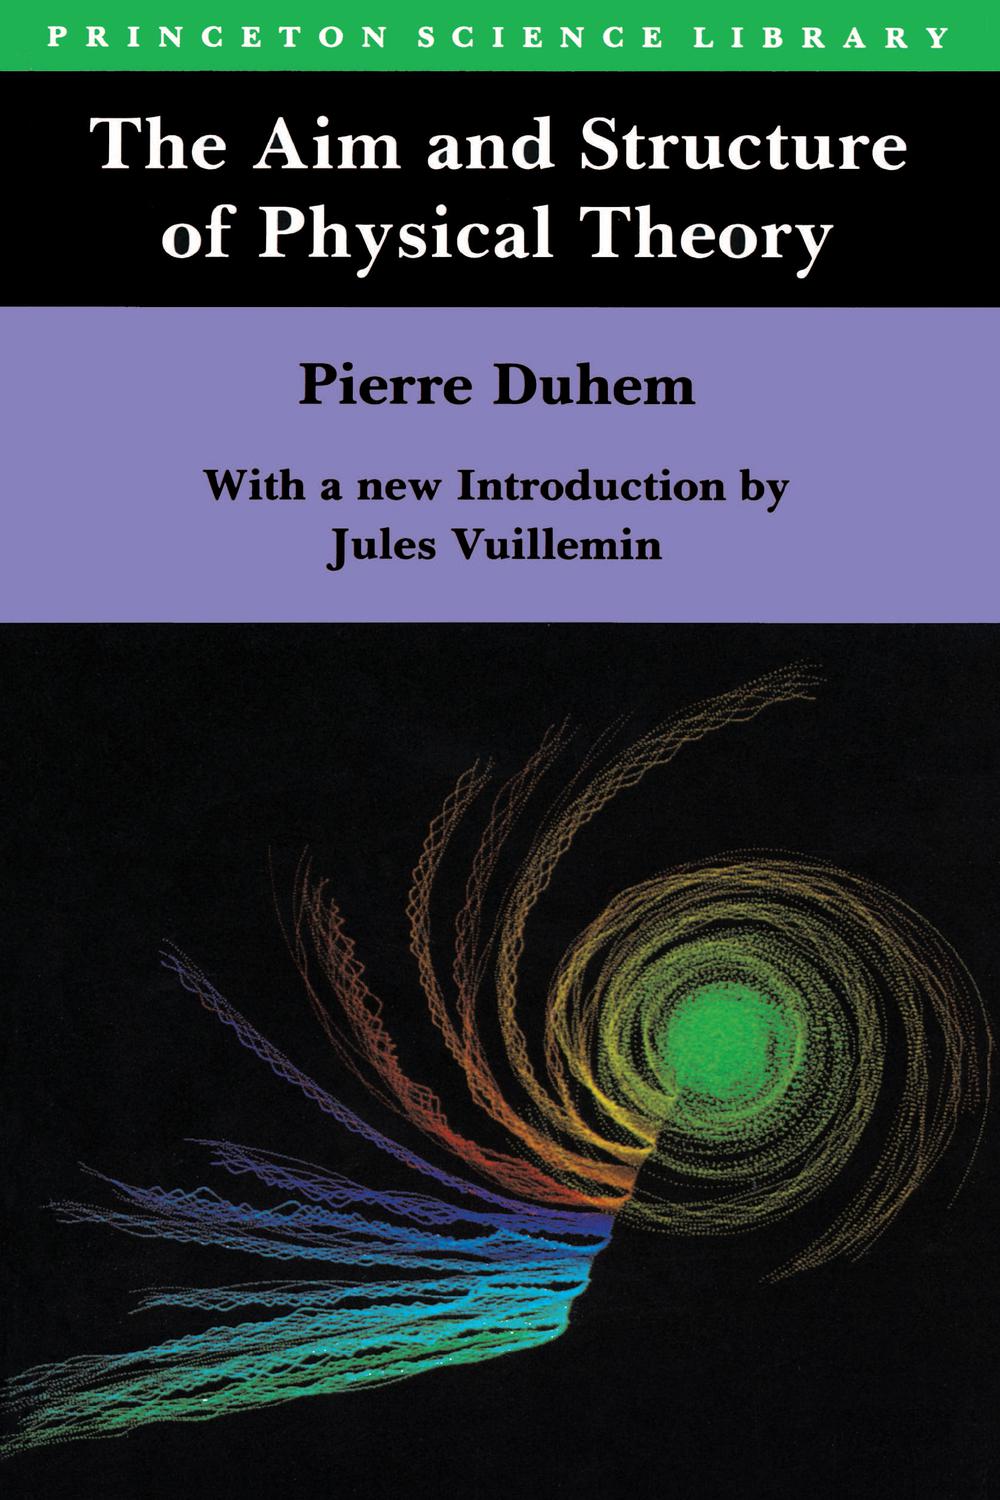 The Aim and Structure of Physical Theory - Pierre Maurice Marie Duhem,Philip P. Wiener,